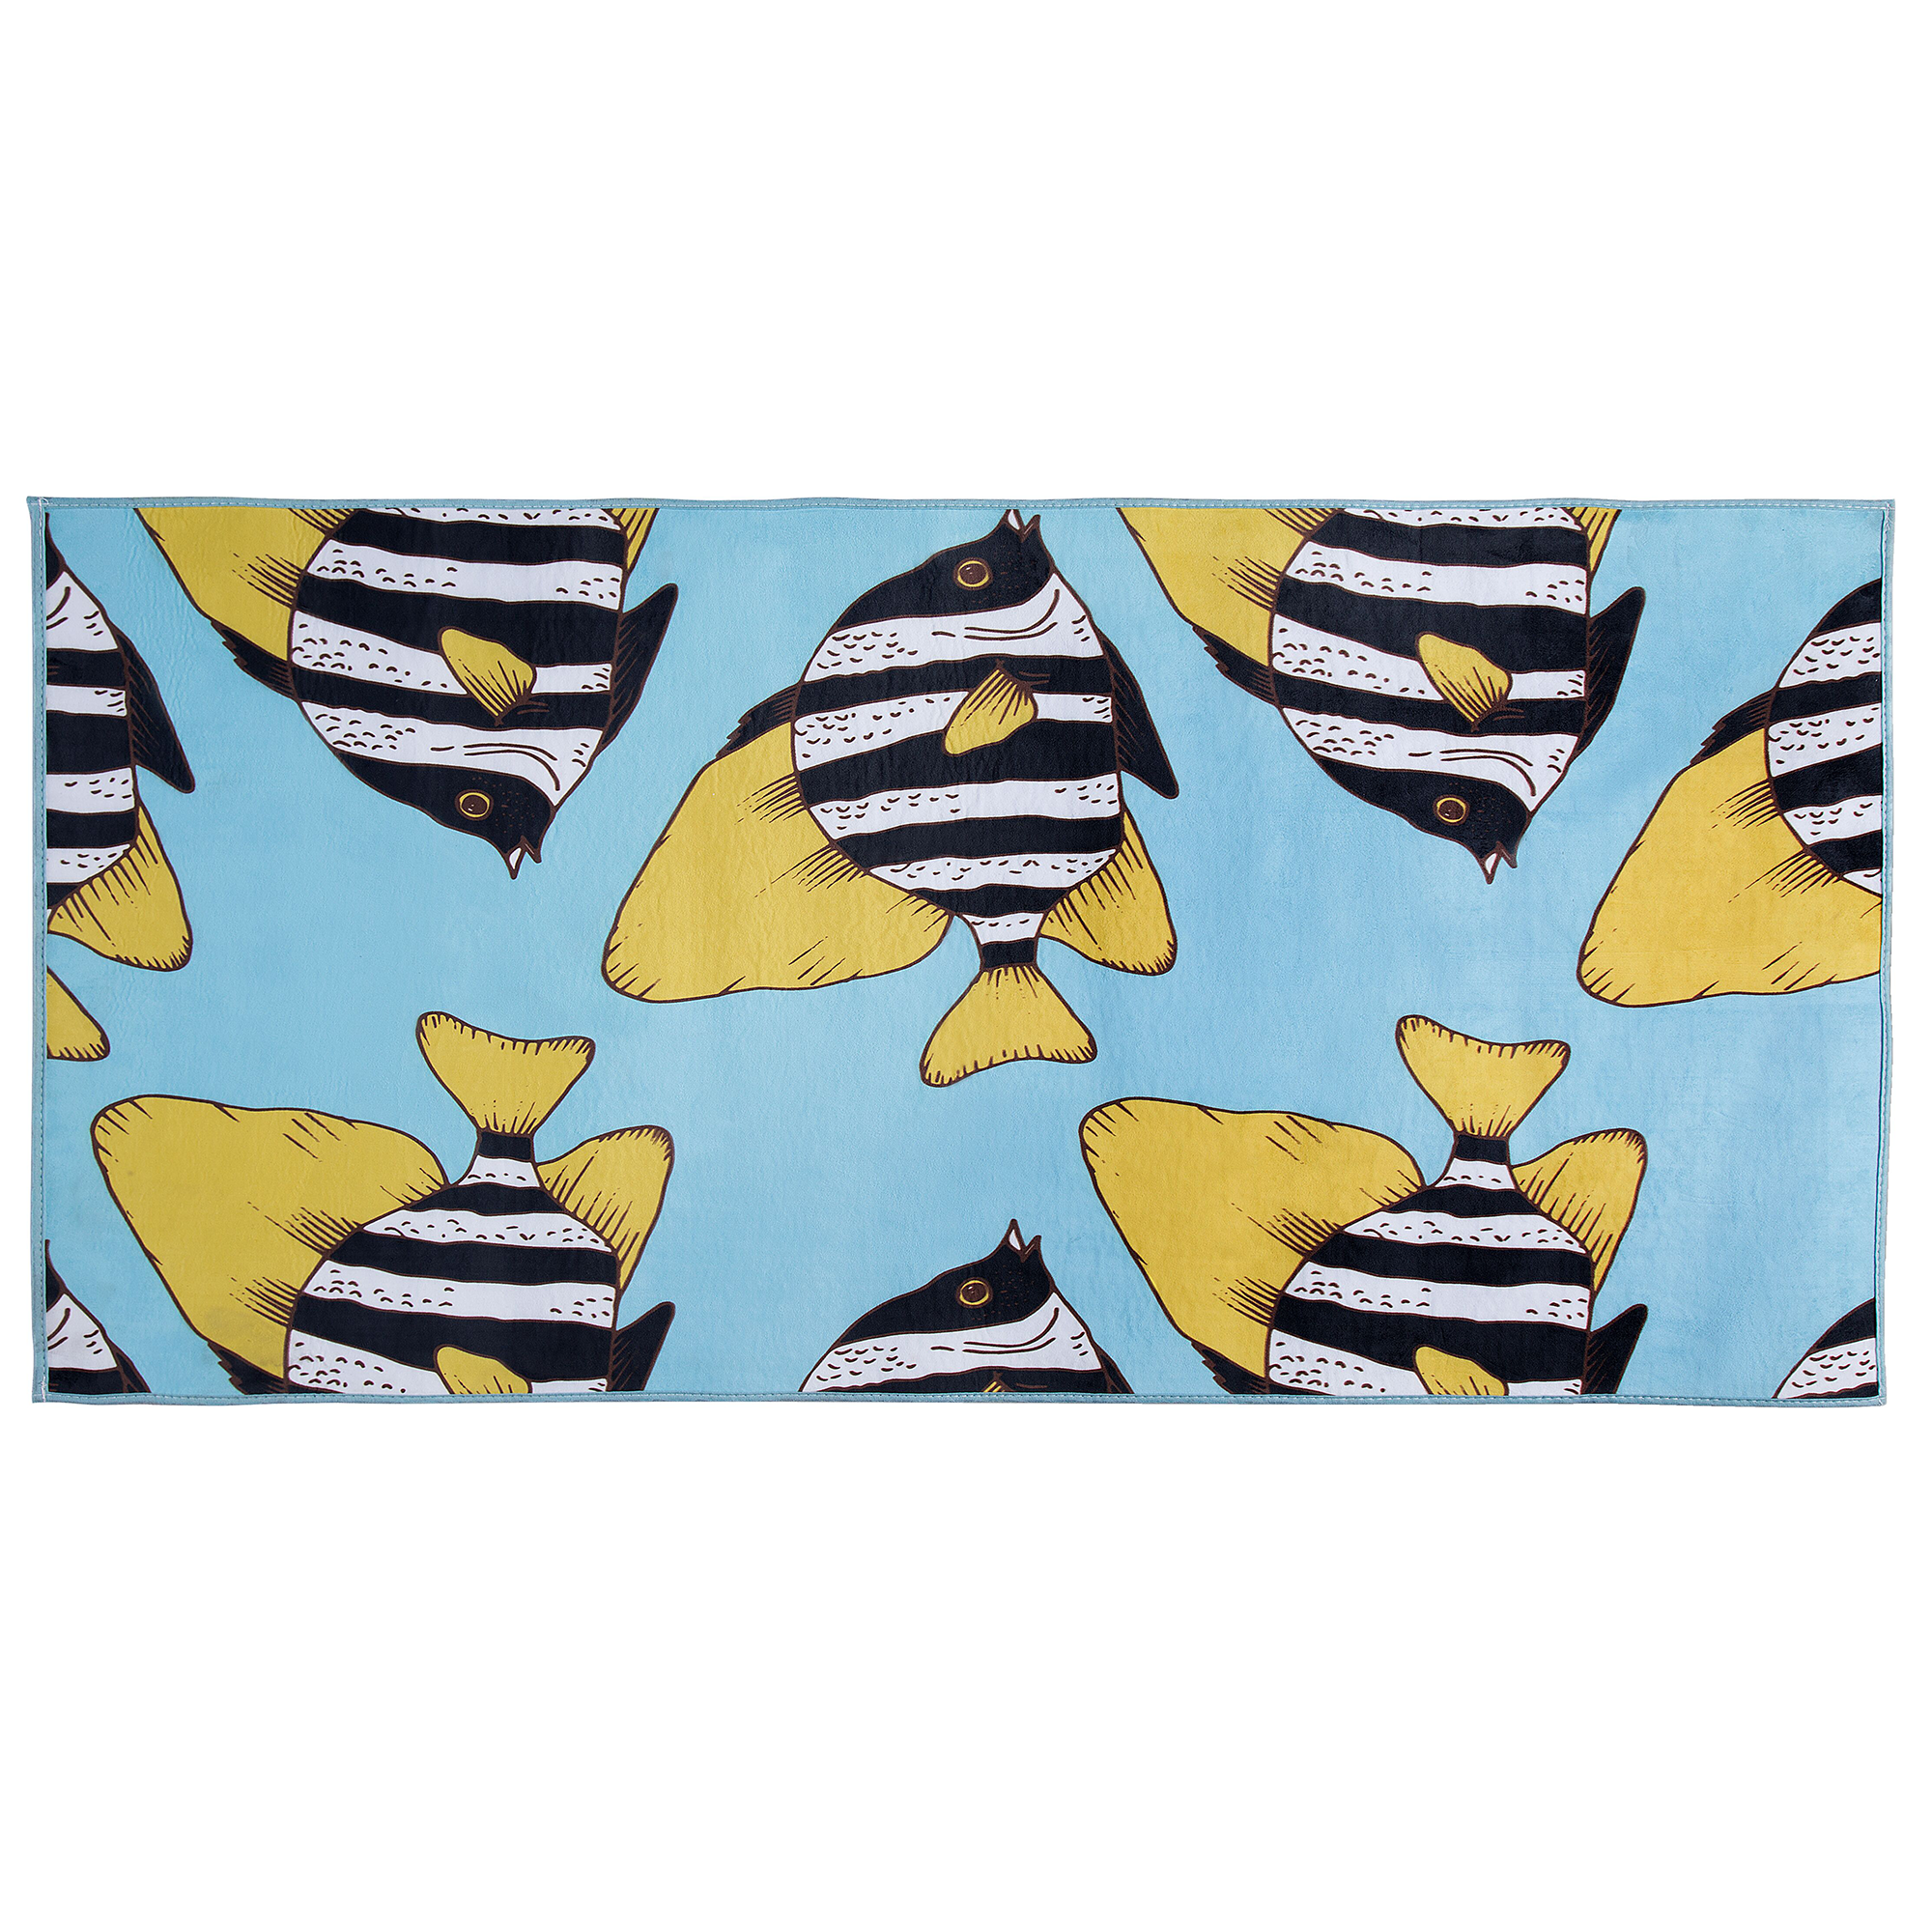 Beliani Area Rug Green and Yellow Printed Fish 80 x 150 cm Low Pile for Children